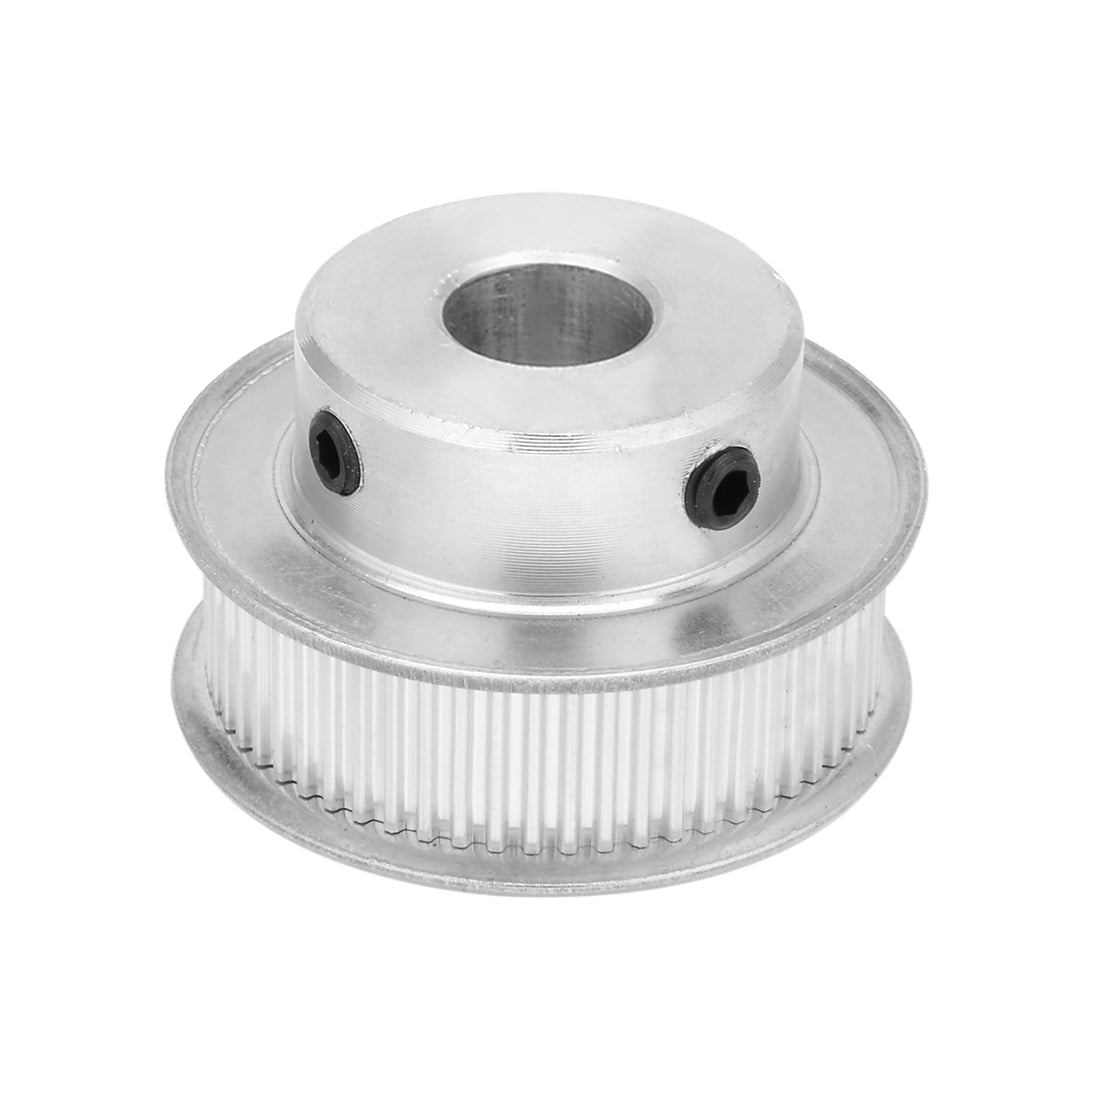 uxcell Uxcell Aluminum M-X-L 60 Teeth 12mm Bore Timing Belt Idler Pulley Synchronous Wheel 10mm Belt for 3D Printer CNC